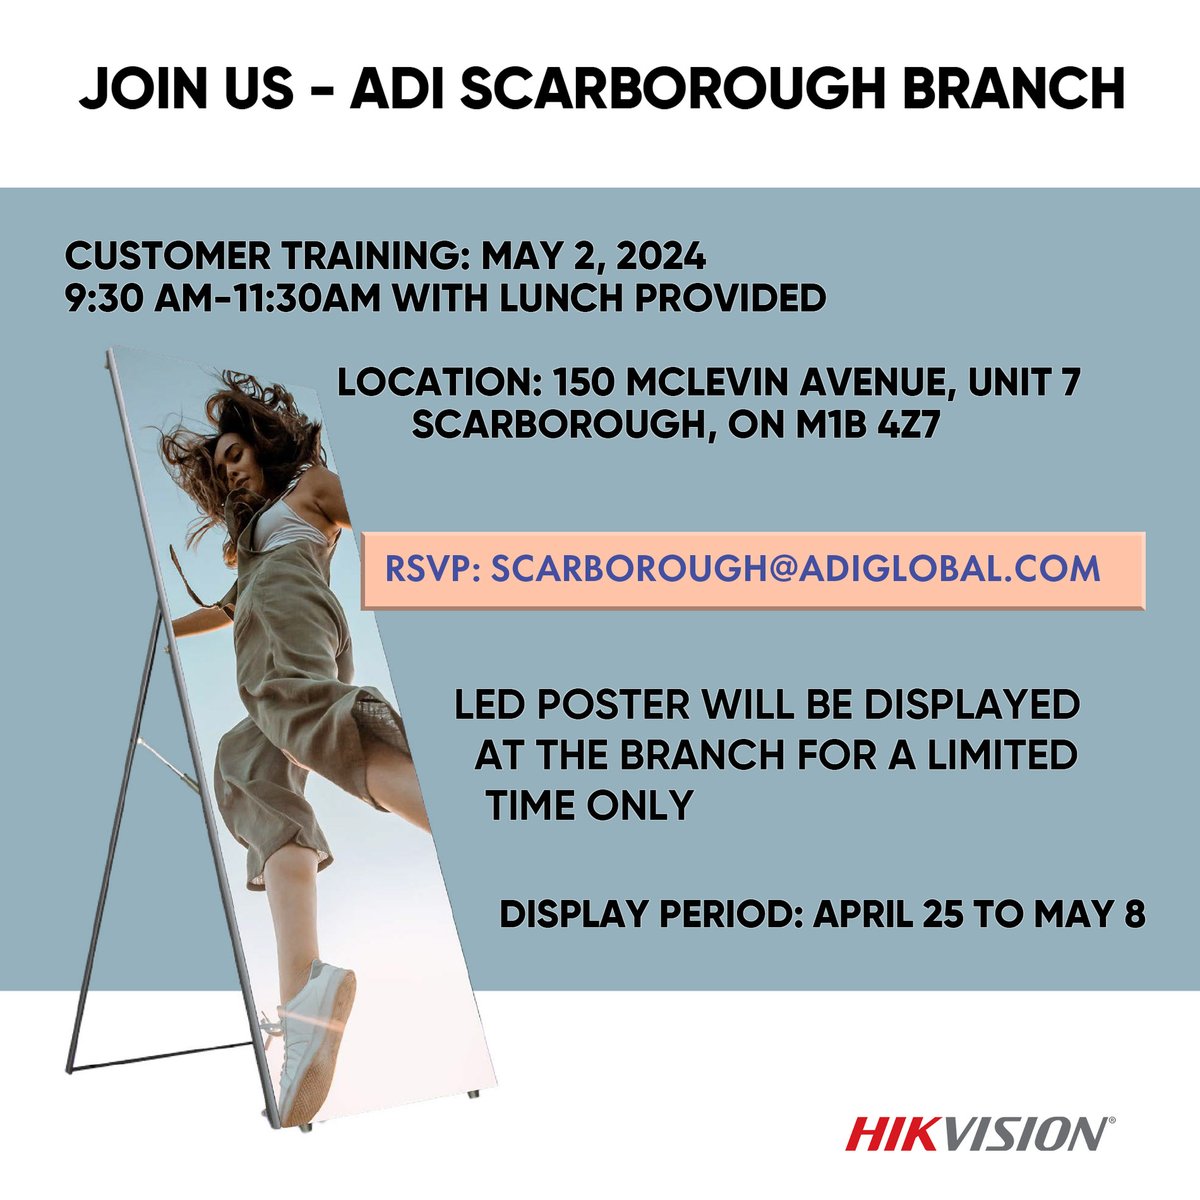 Don't forget to join us for an exclusive training session tomorrow at ADI Scarborough! 

Get a first look at Hikvision's latest innovations.

Time: 9:30 AM to 11:30 AM EST.
Lunch will be provided!

RSVP here: scarborough@adiglobal.com

#Hikvision #HikvisionCanada